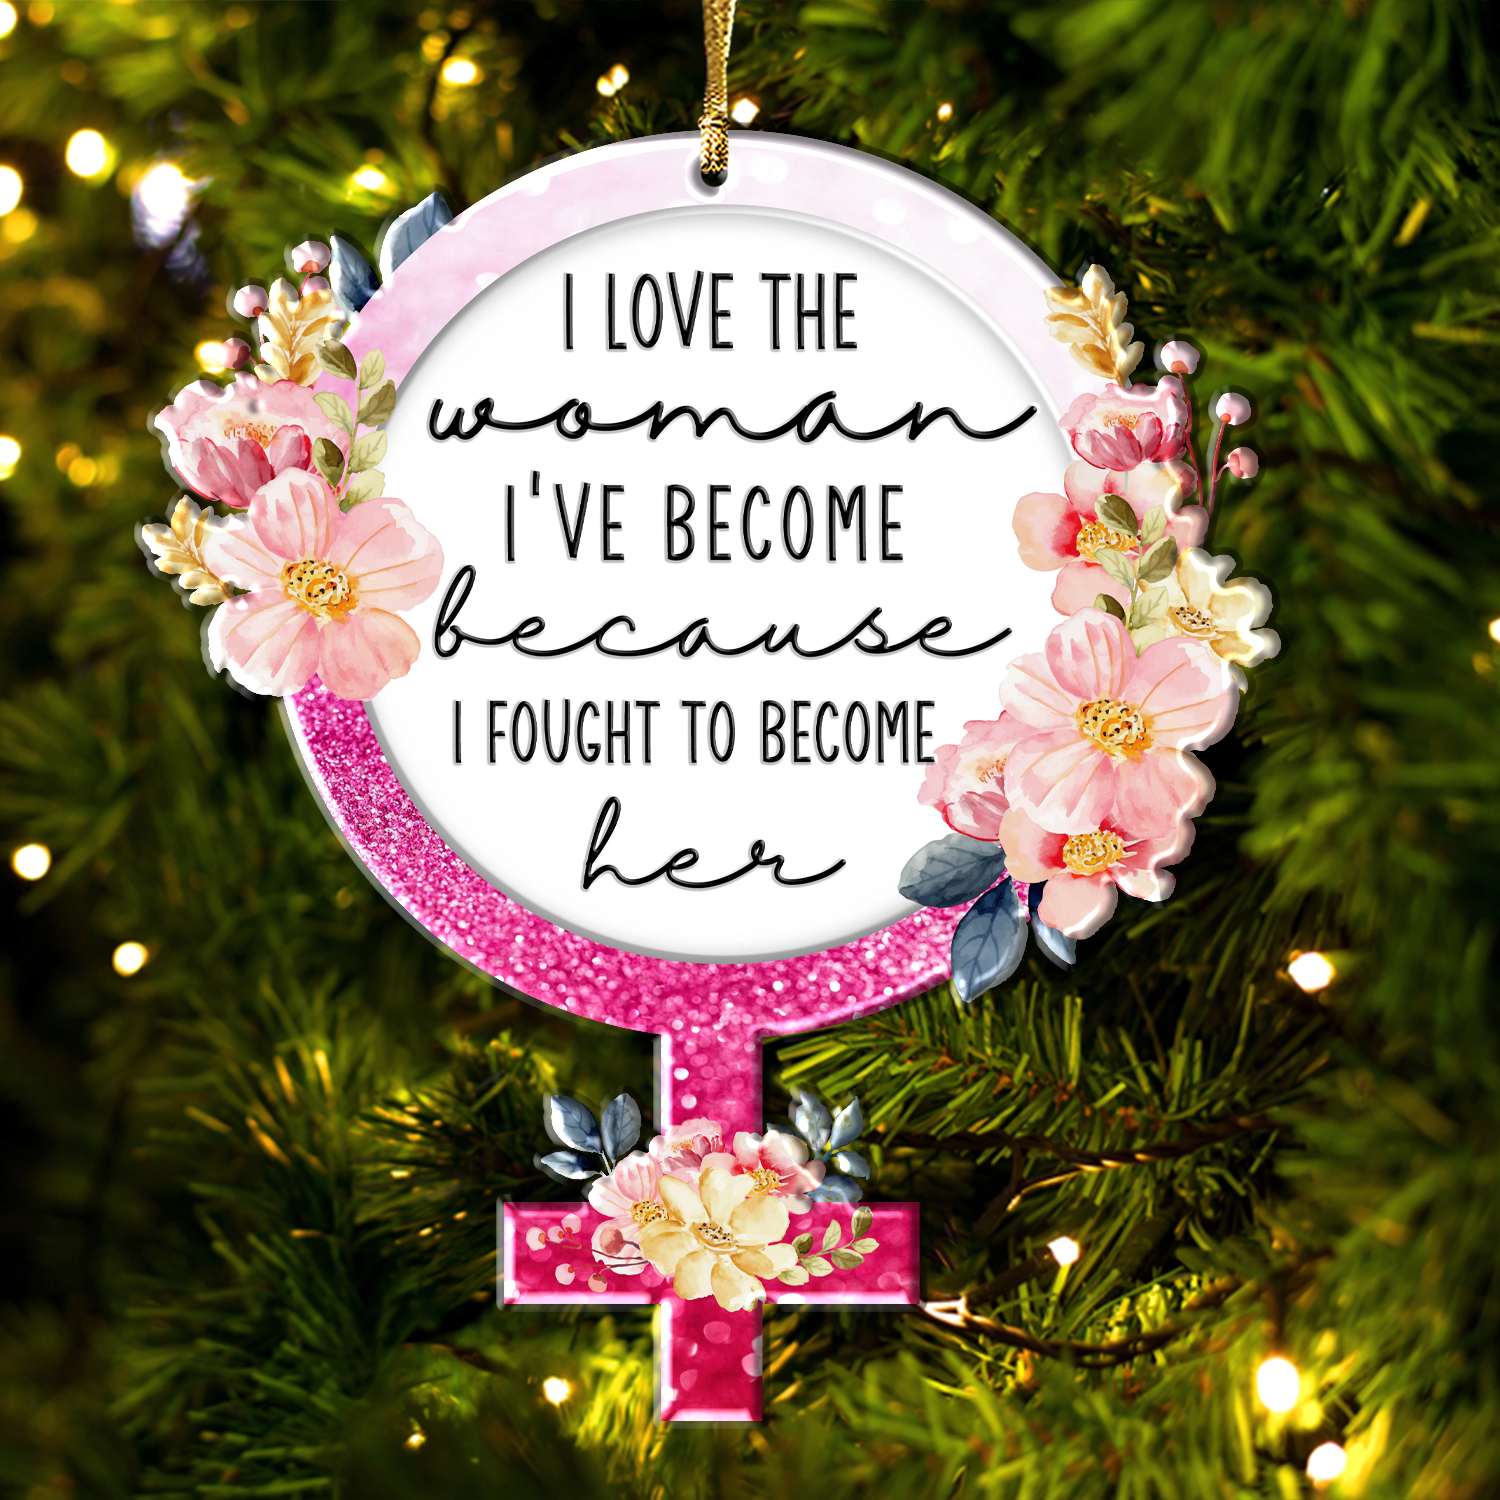 Flower Woman Power Christian Gifts For Women, Birthday Gifts For Women, Ornament Gift, Christmas Ornament Car Hanging